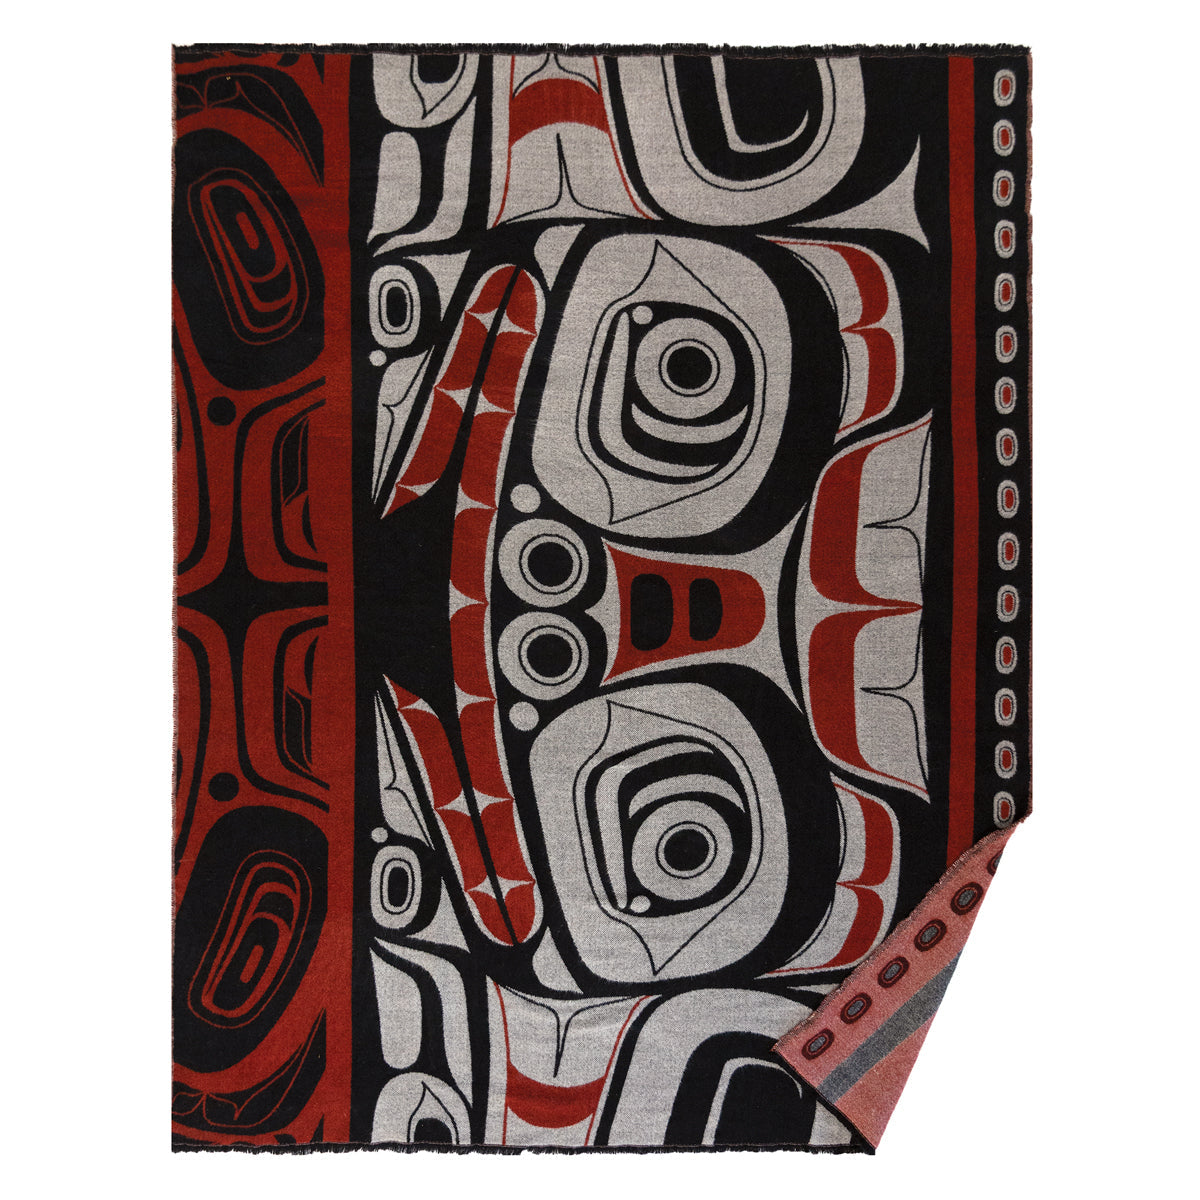 Woven Blanket Morgan Asoyuf Matriarch Bear - Woven Blanket Morgan Asoyuf Matriarch Bear -  - House of Himwitsa Native Art Gallery and Gifts